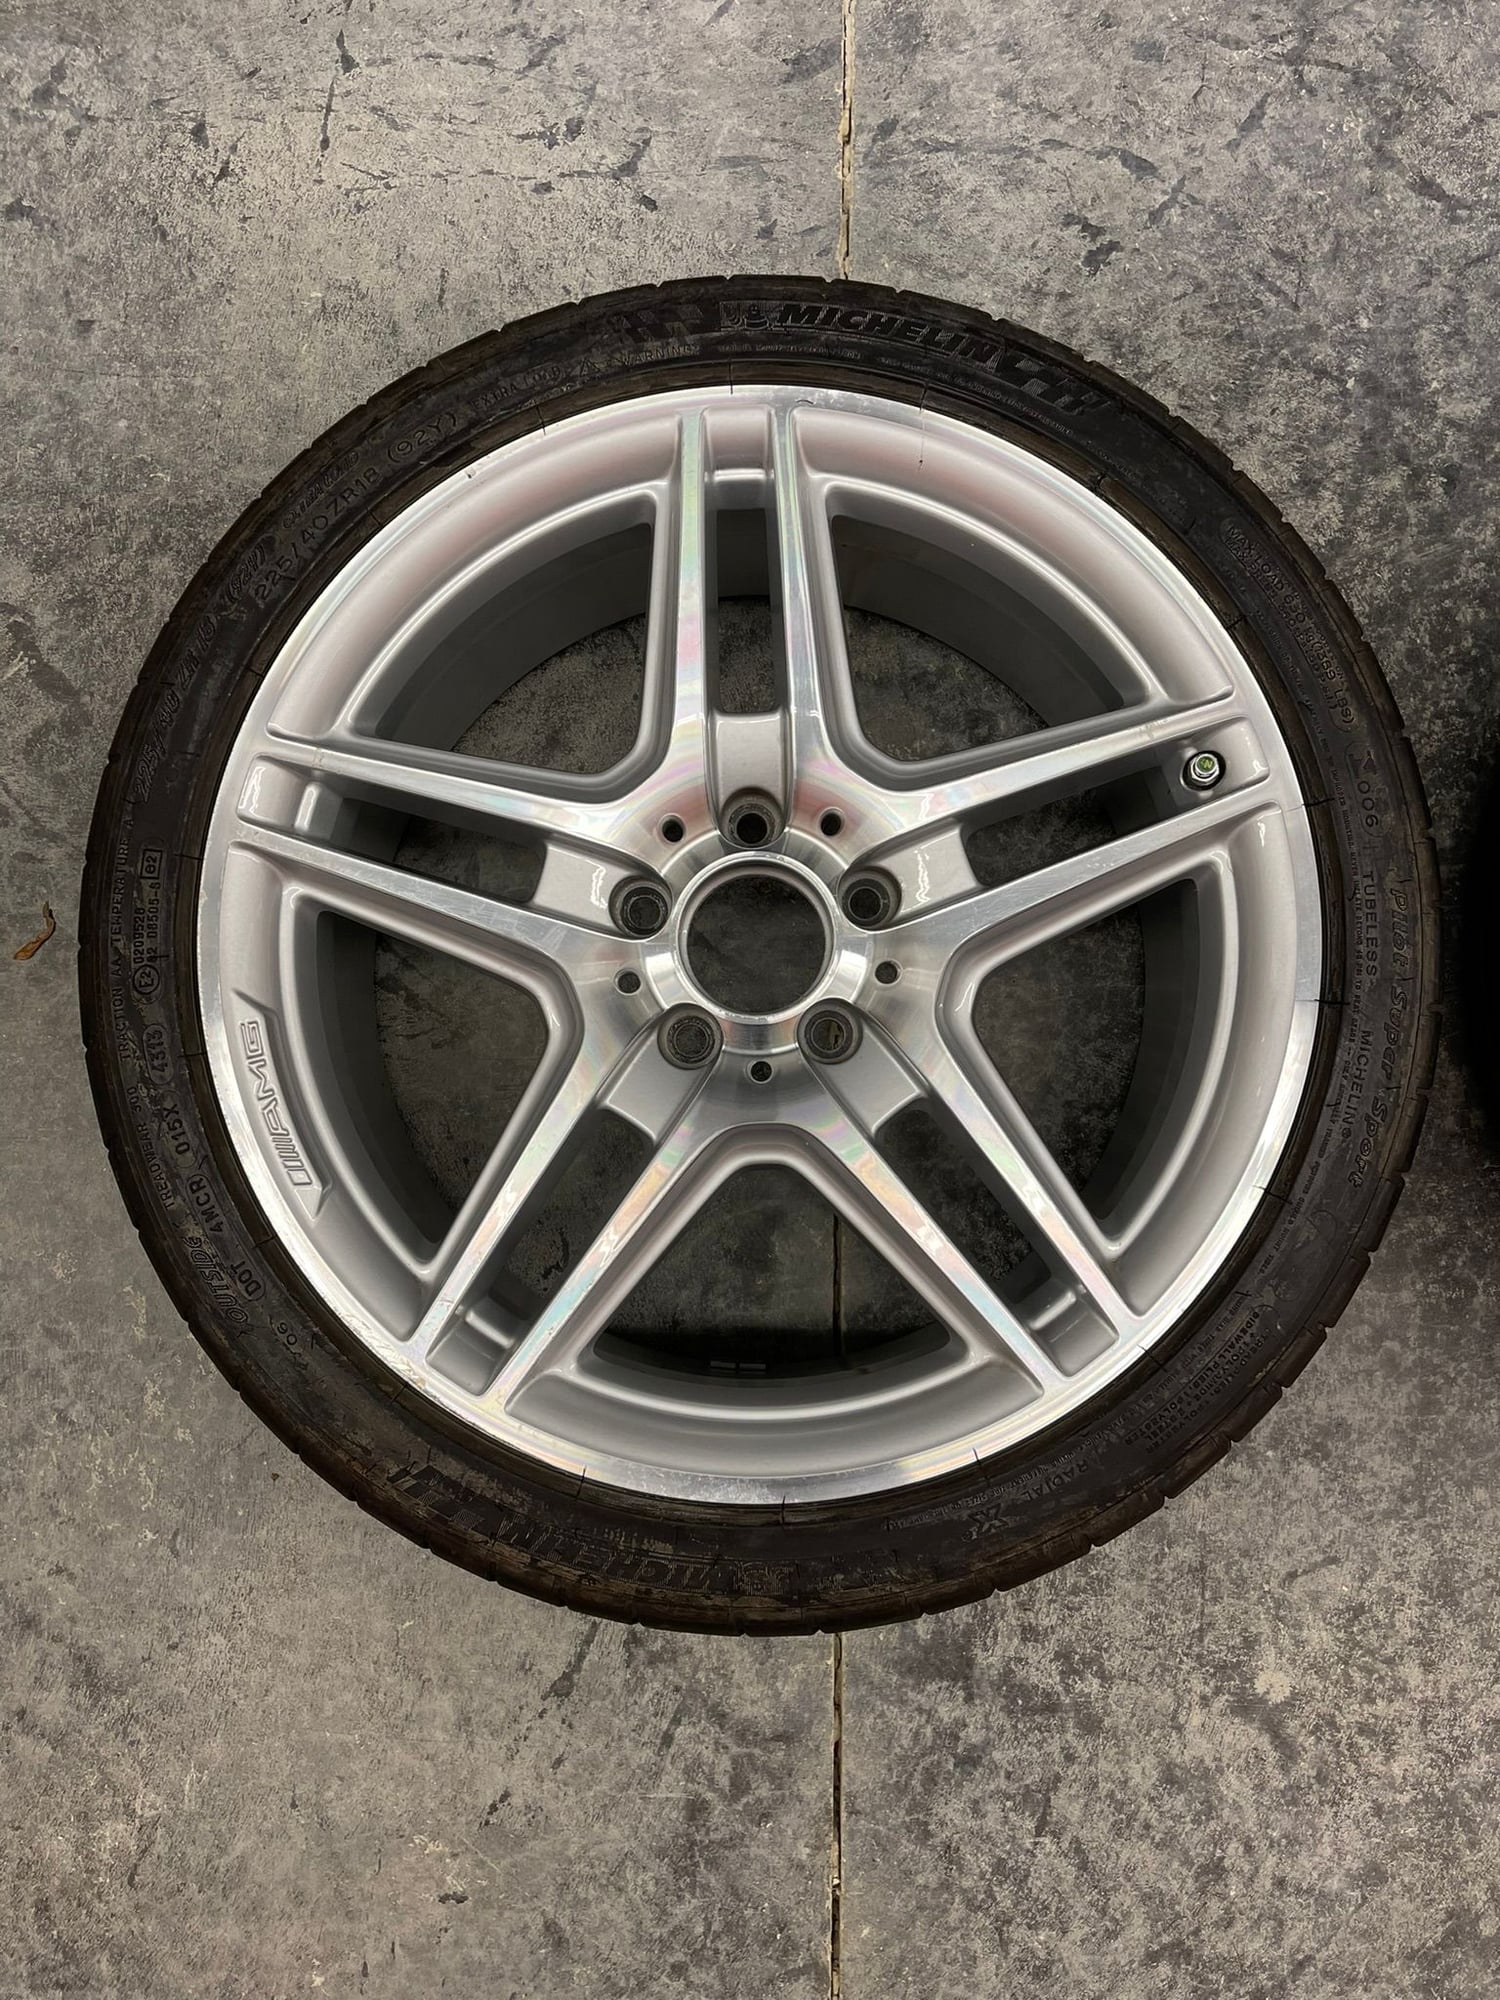 Wheels and Tires/Axles - W204: 18" AMG Staggered Wheel Set (4x Wheels) - Used - 2008 to 2014 Mercedes-Benz C300 - 2008 to 2014 Mercedes-Benz C350 - 2008 to 2014 Mercedes-Benz C250 - Lincolnshire, IL 60069, United States